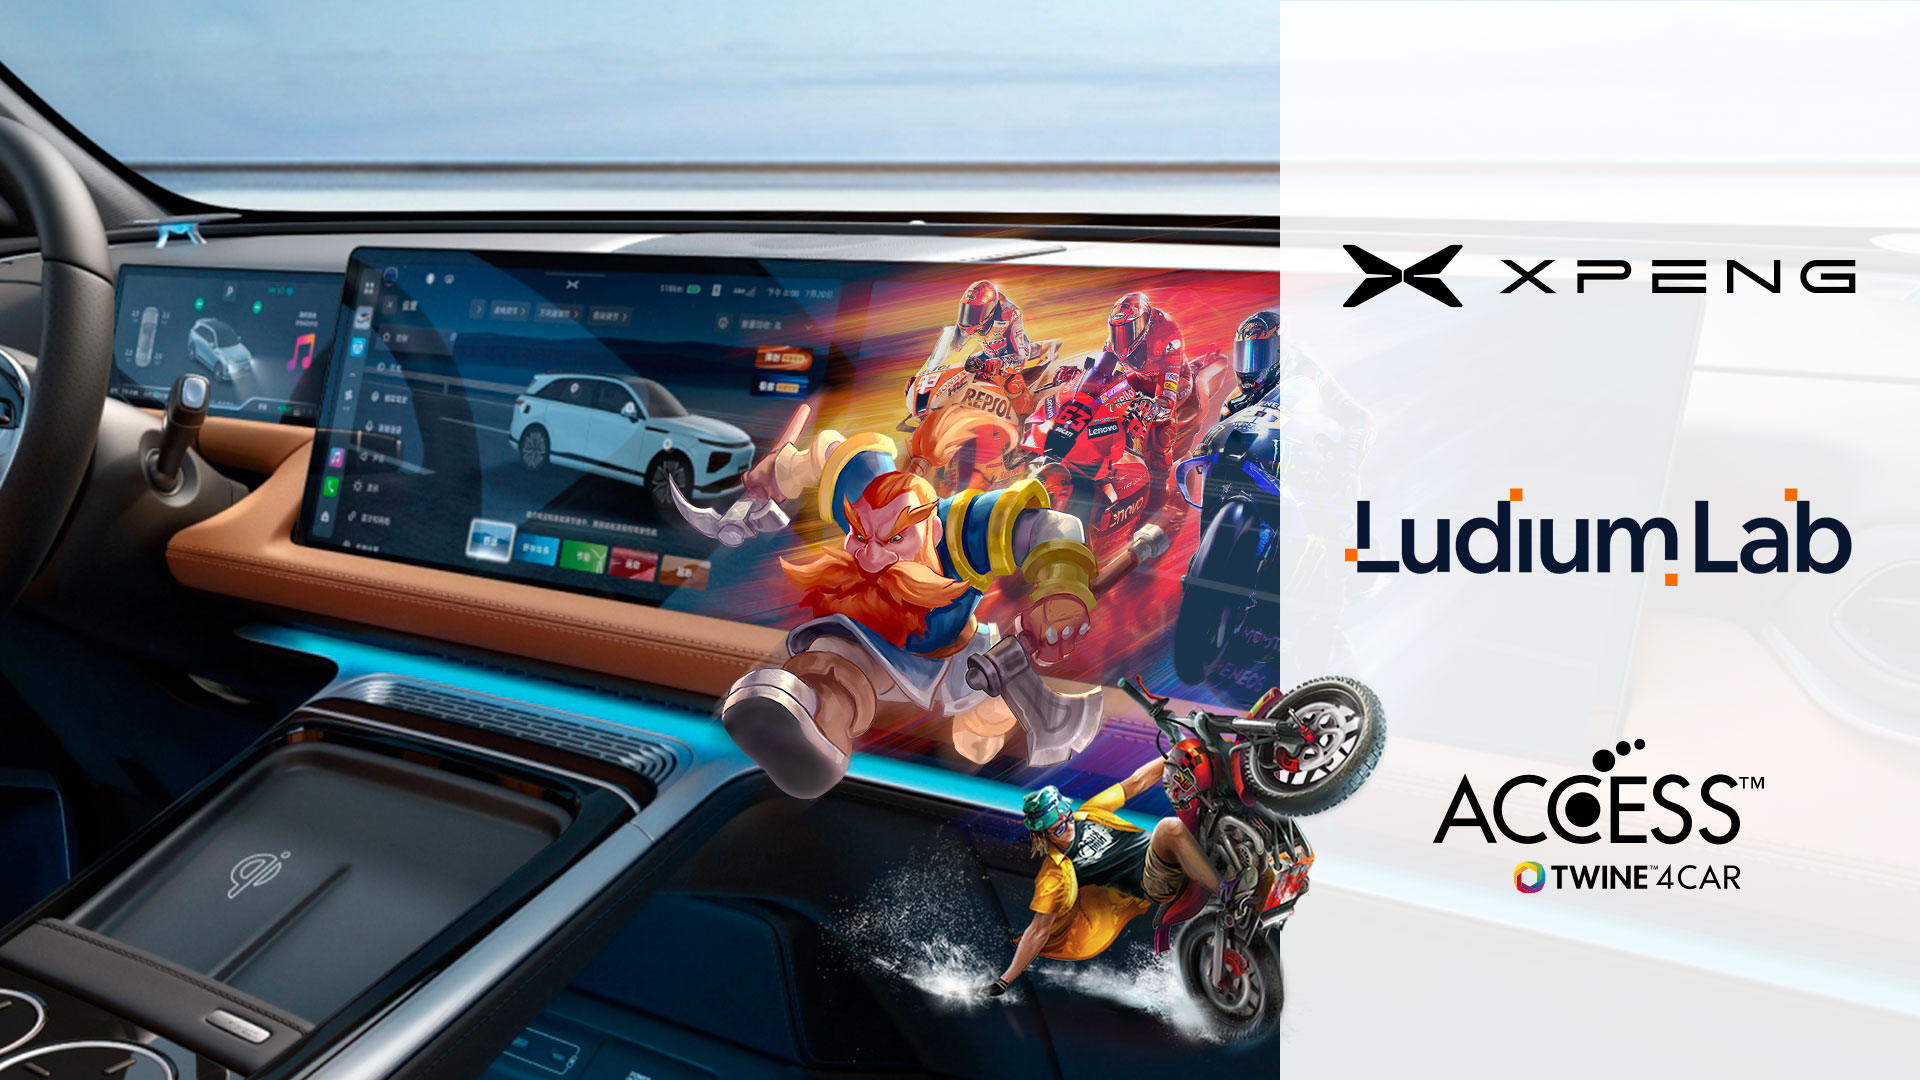 In-car online gaming with XPENG, Ludiu Lab and ACCESS